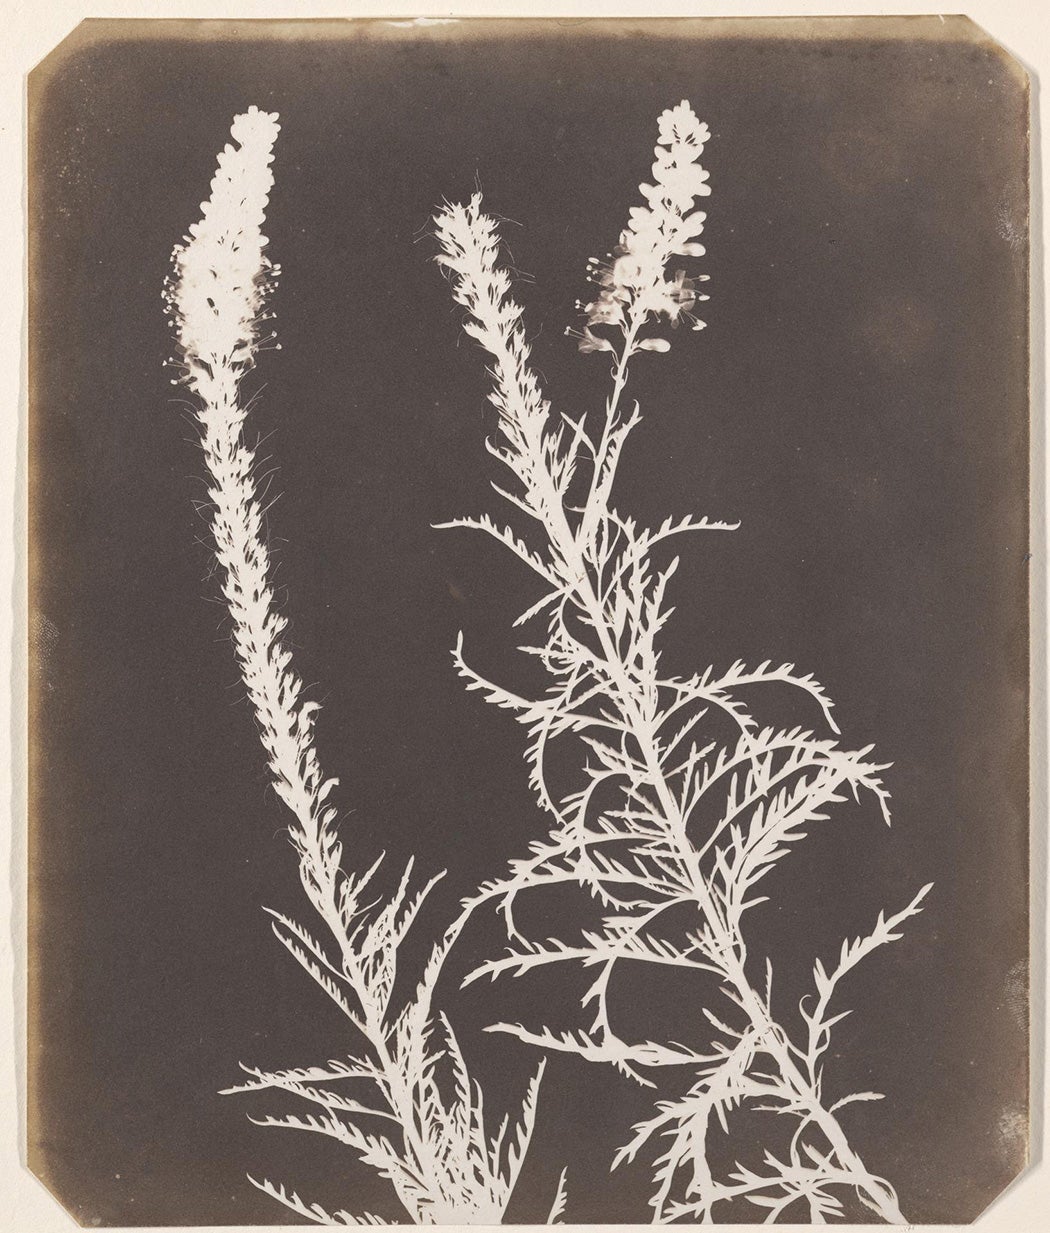 Veronica in Bloom, between 1843 and 1844, by William Henry Fox Talbot